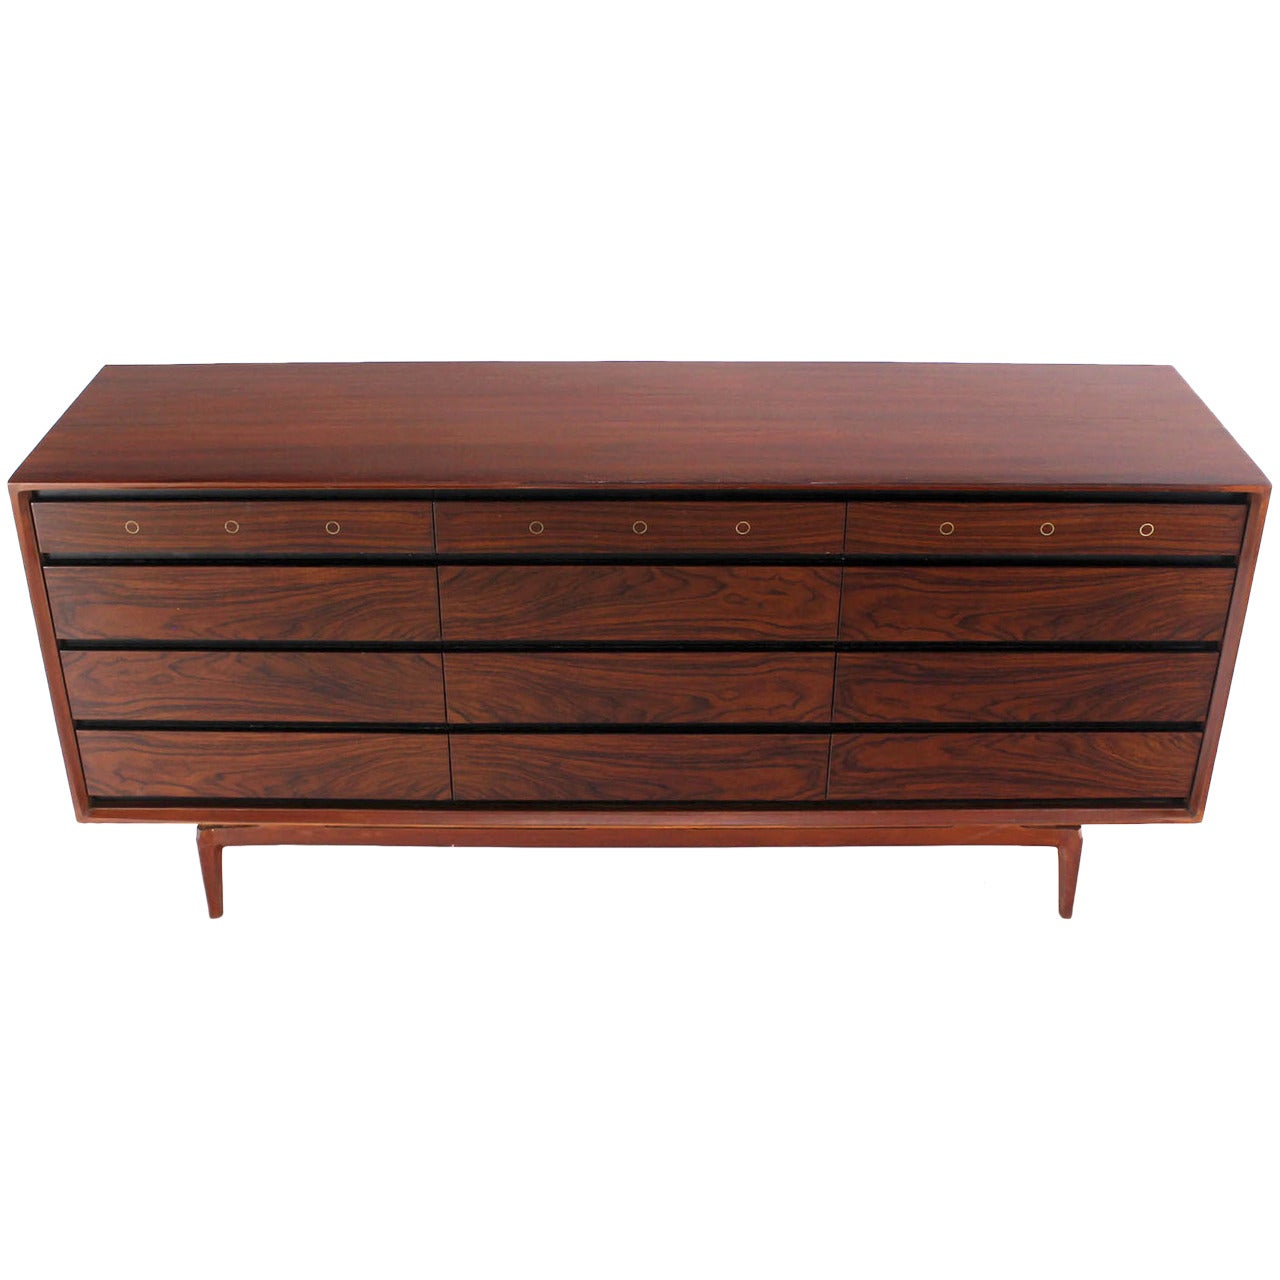 Rosewood and Walnut Midcentury Modern Twelve-Drawer Dresser with Brass Accents